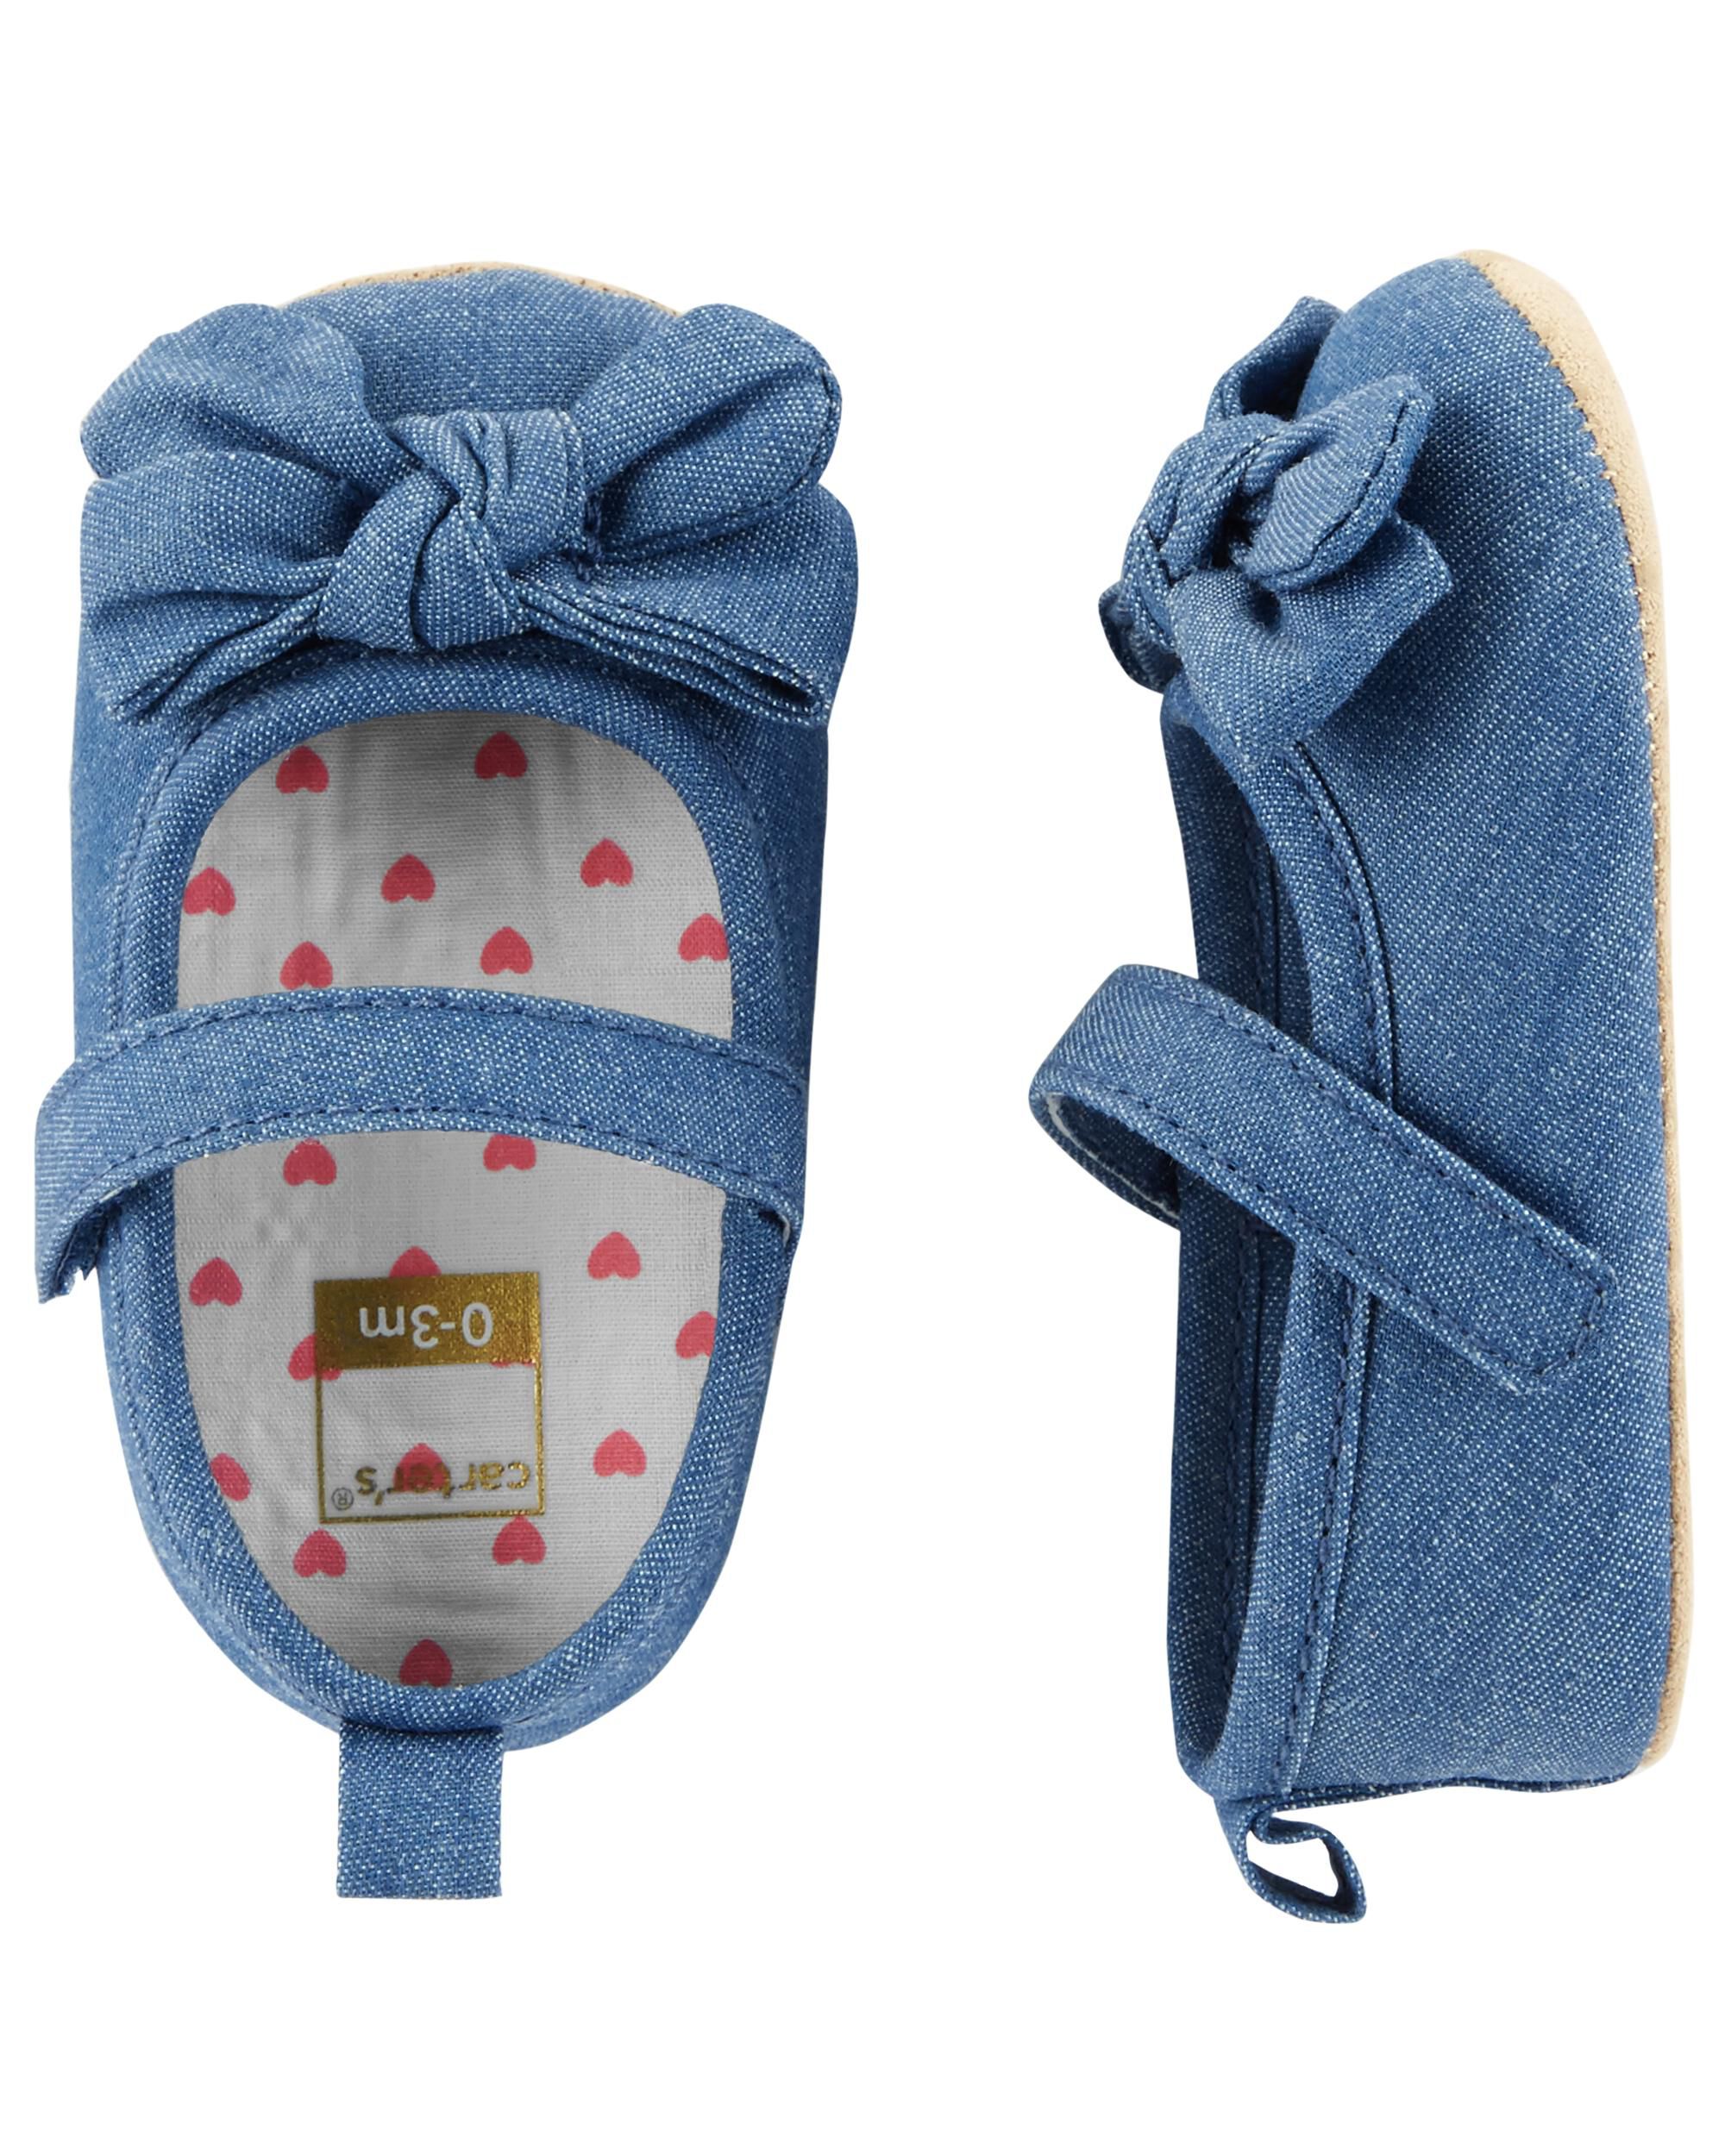 carter's mary jane baby shoes